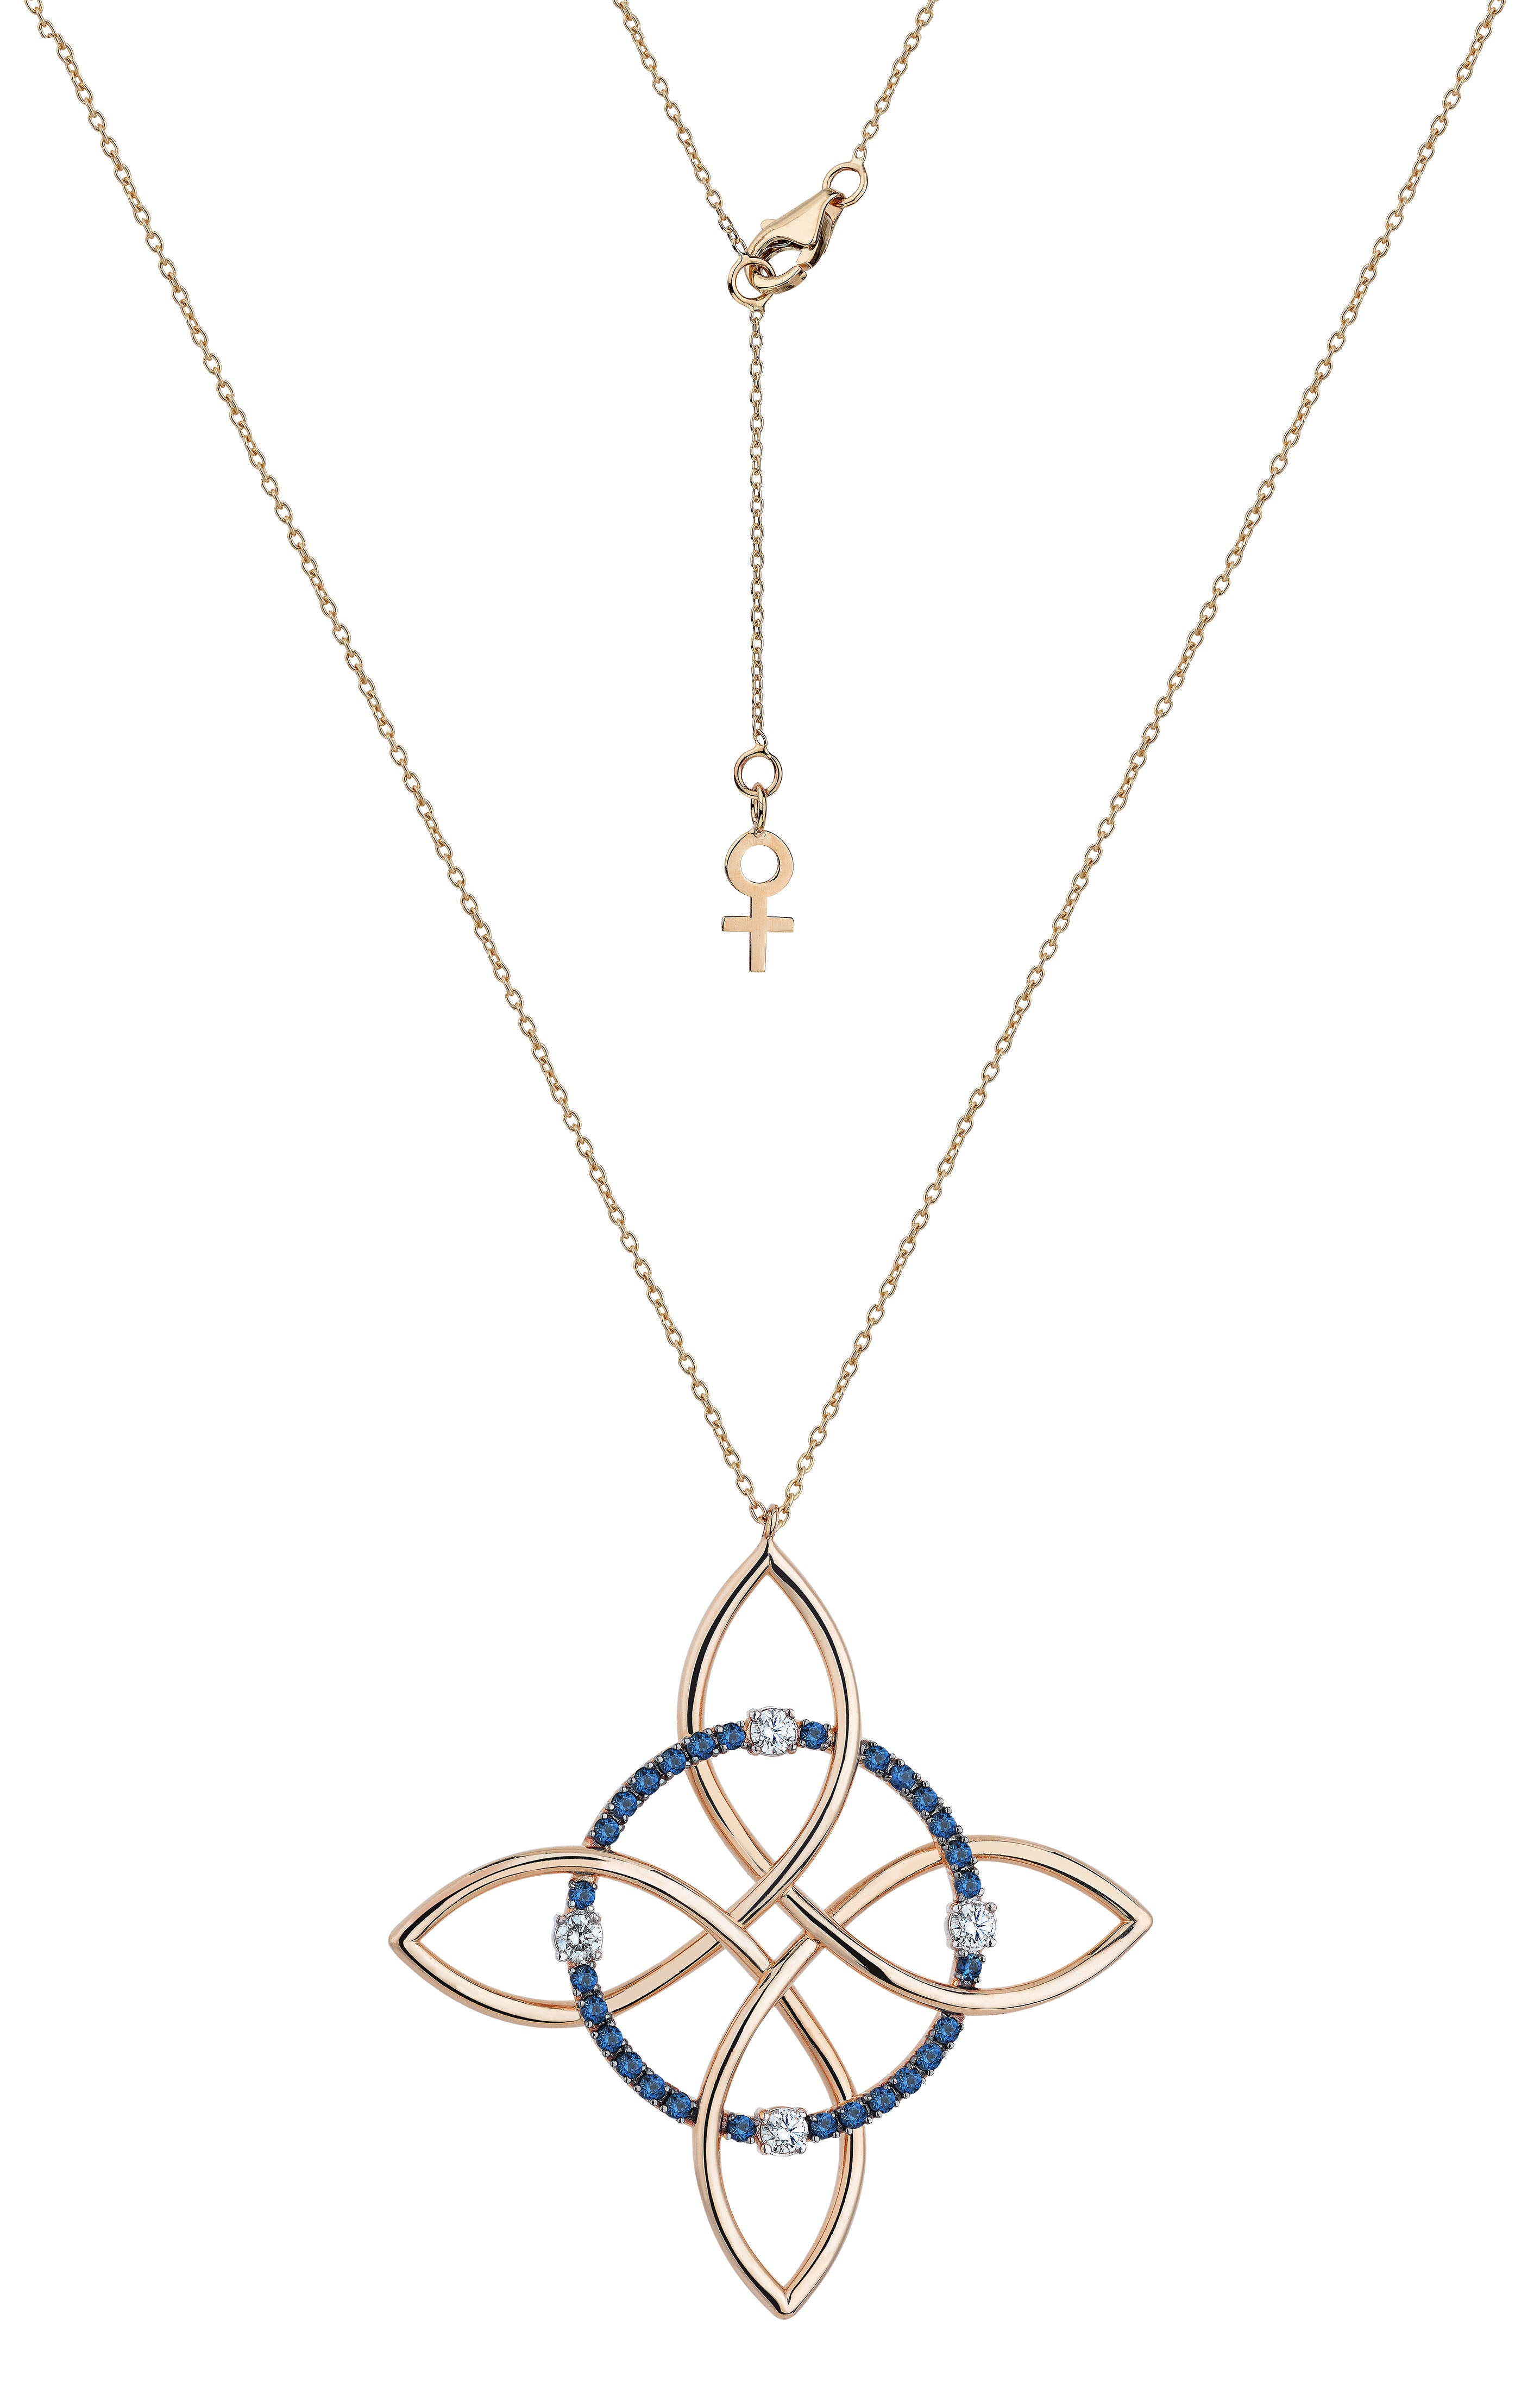 Magnific Magic Knot Necklace in Rose Gold - Her Story Shop